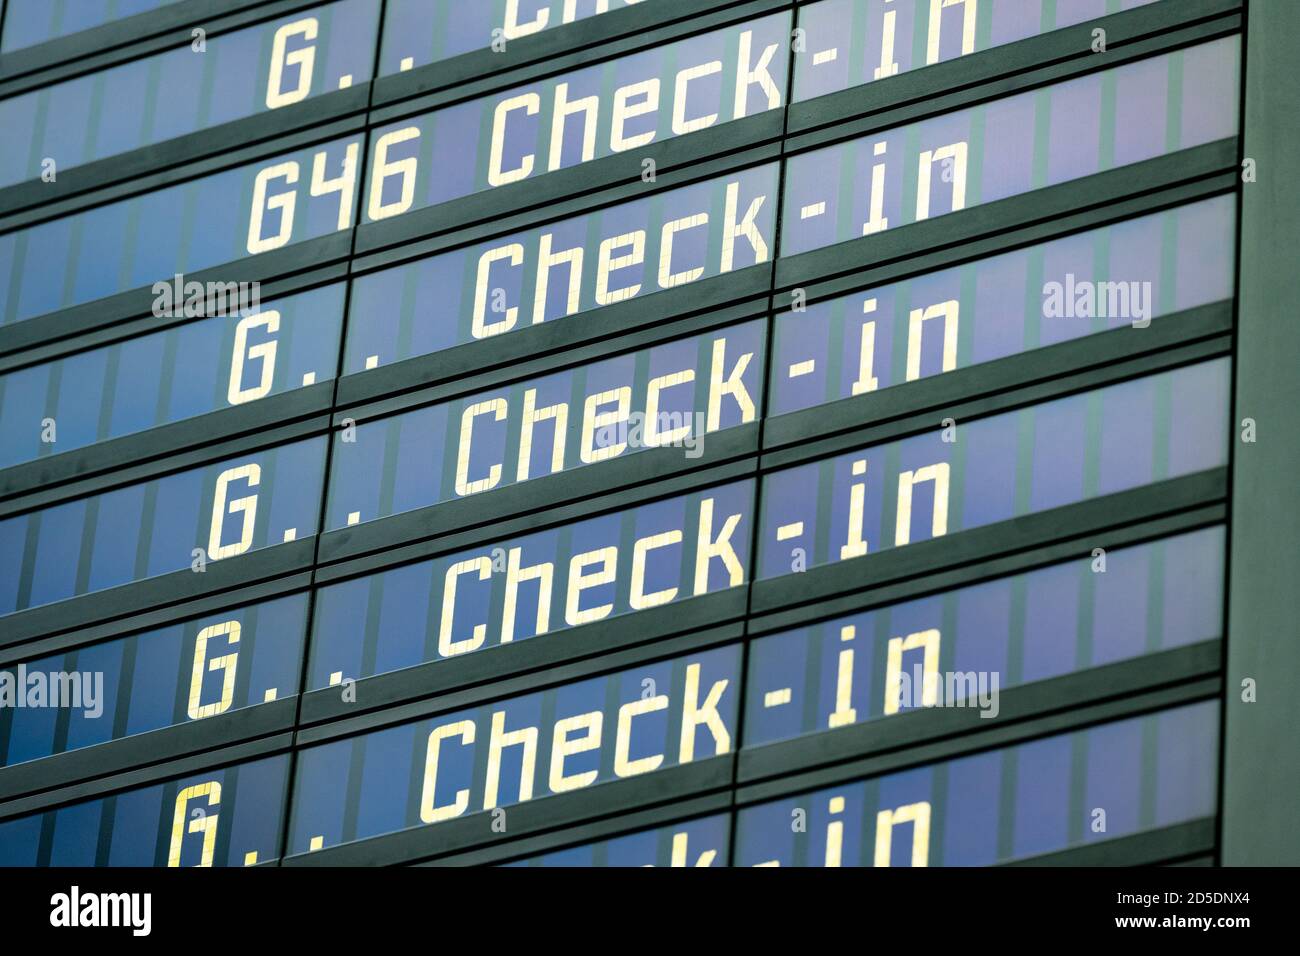 Digital Display in the airport shows 'Check-in' in many lines one below the other. Stock Photo